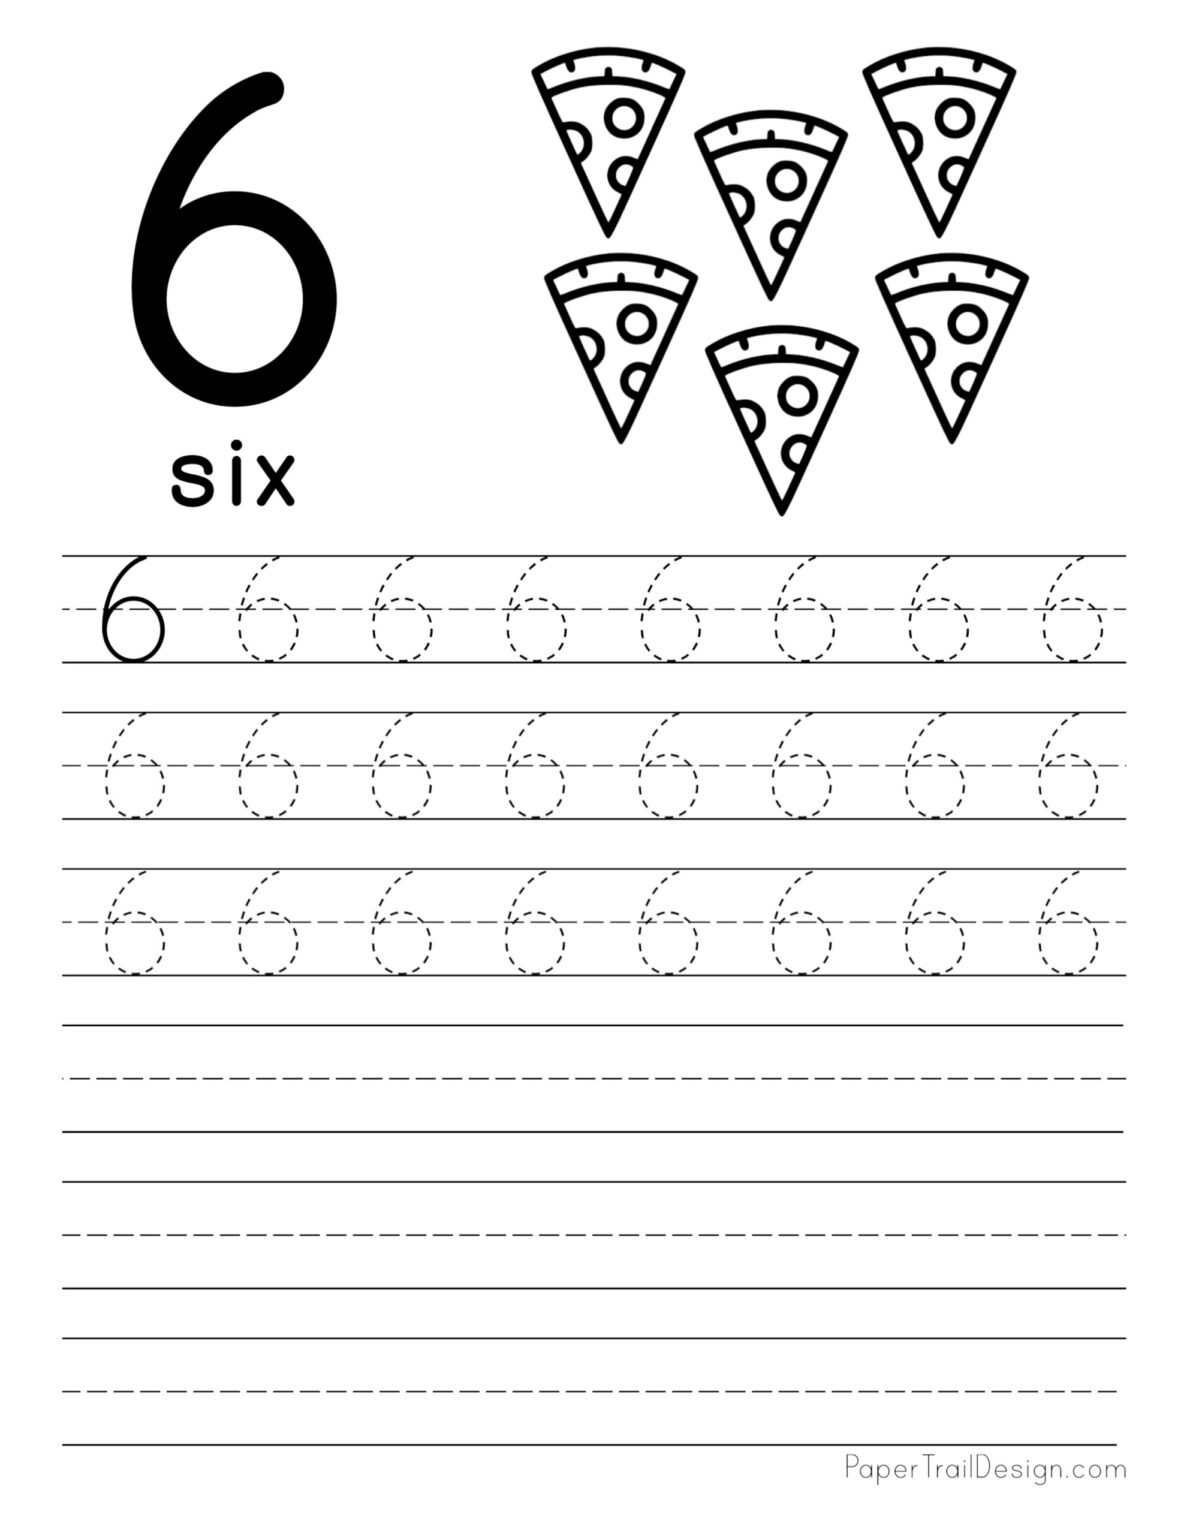 learning-the-number-6-tracing-academy-worksheets